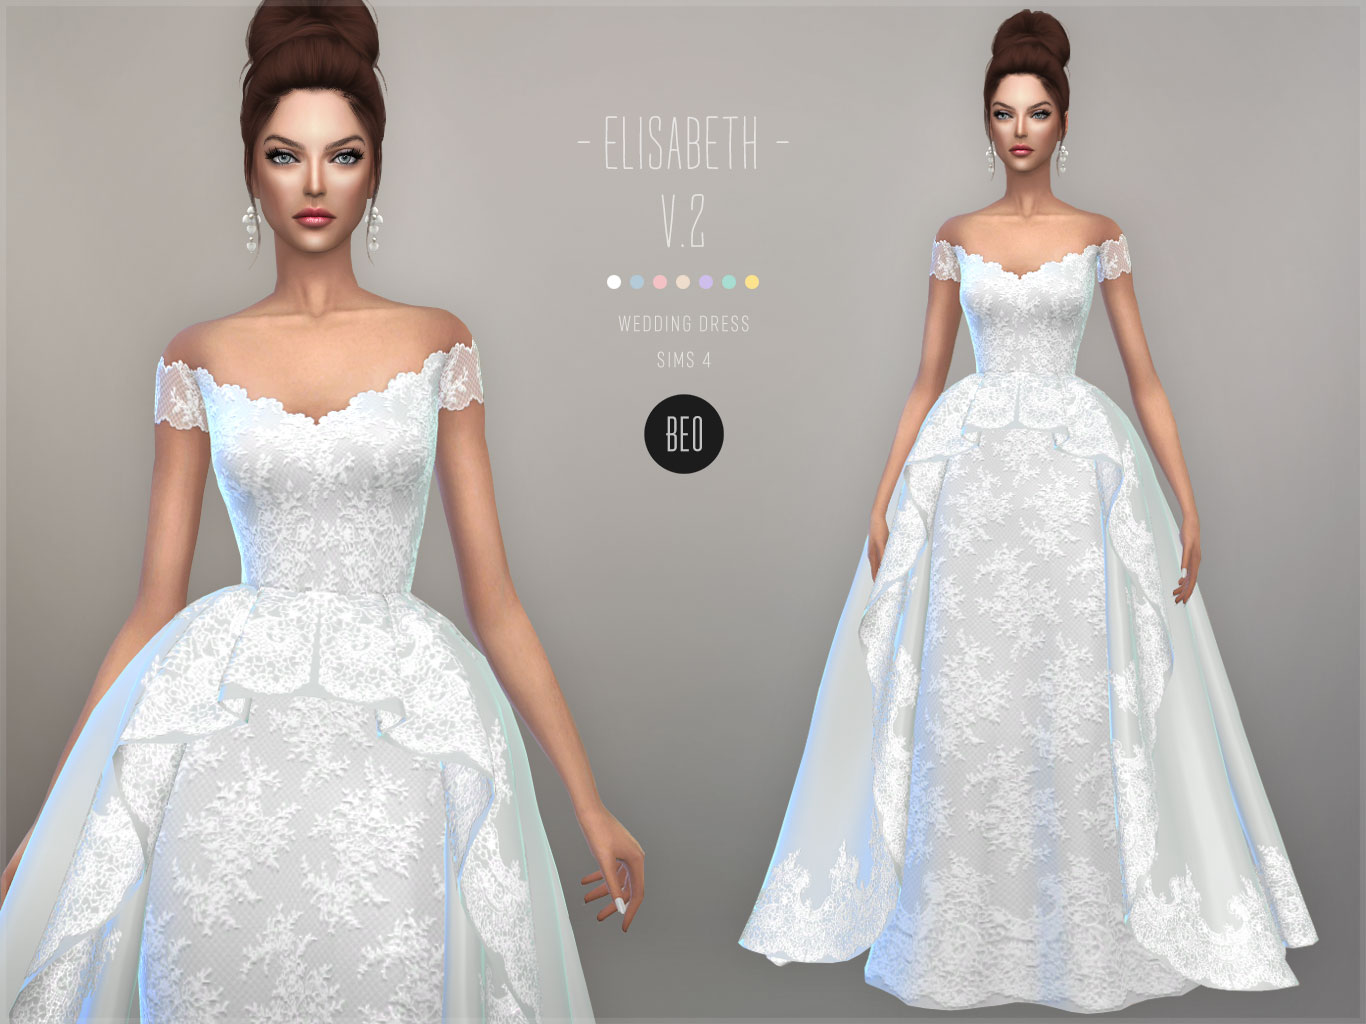 Wedding gown - Elisabeth V.2 for The Sims 4 by BEO